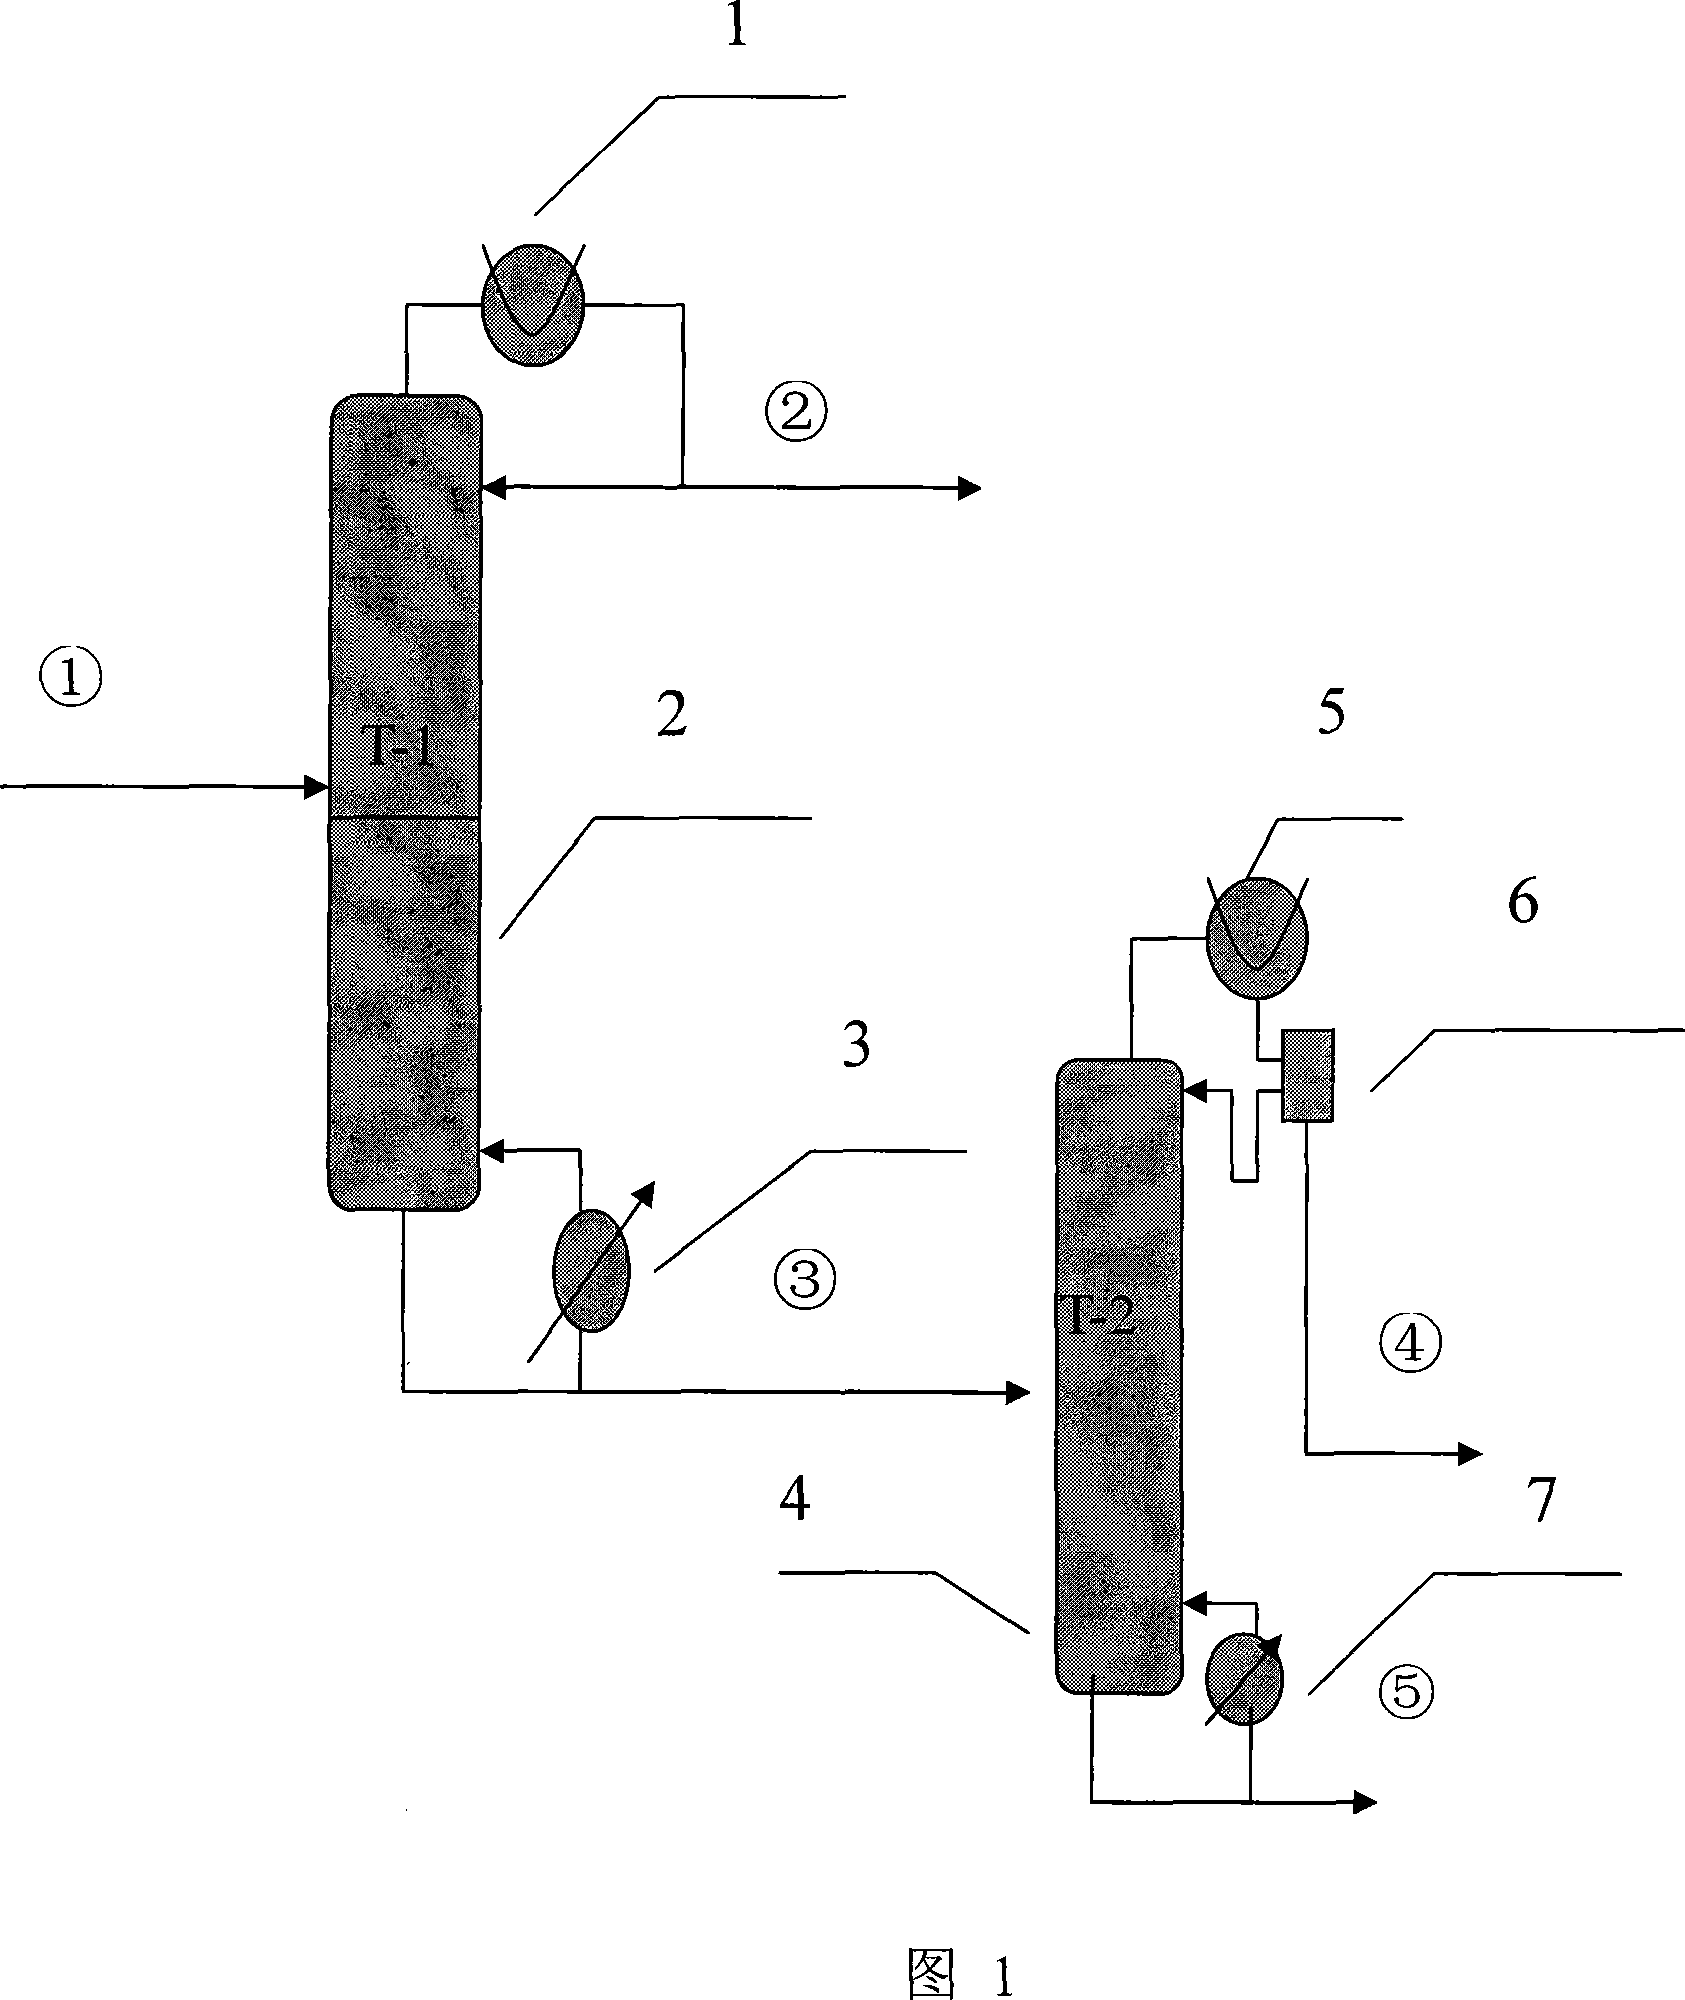 Method for separating Ethylene glycol monomethyl ether, methanol and water by rectification and azeotropy